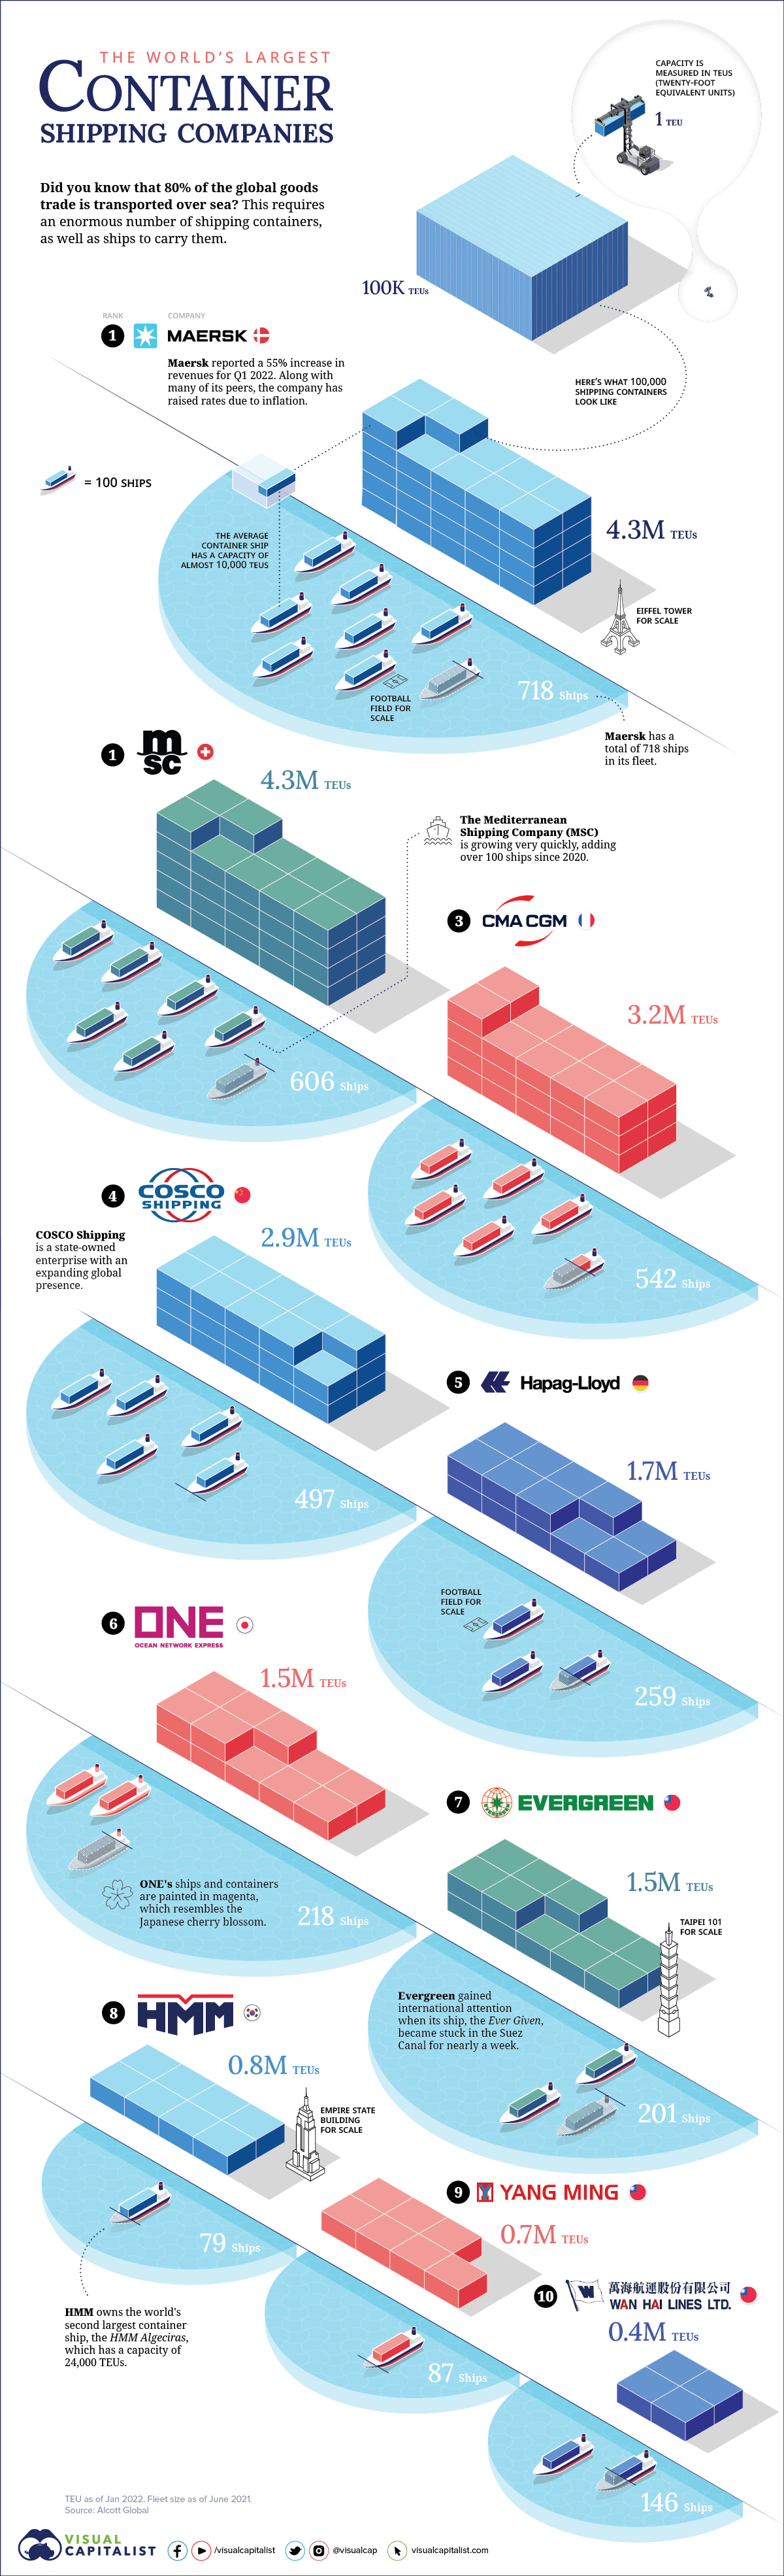 Visualized The World’s Largest Container Shipping Companies